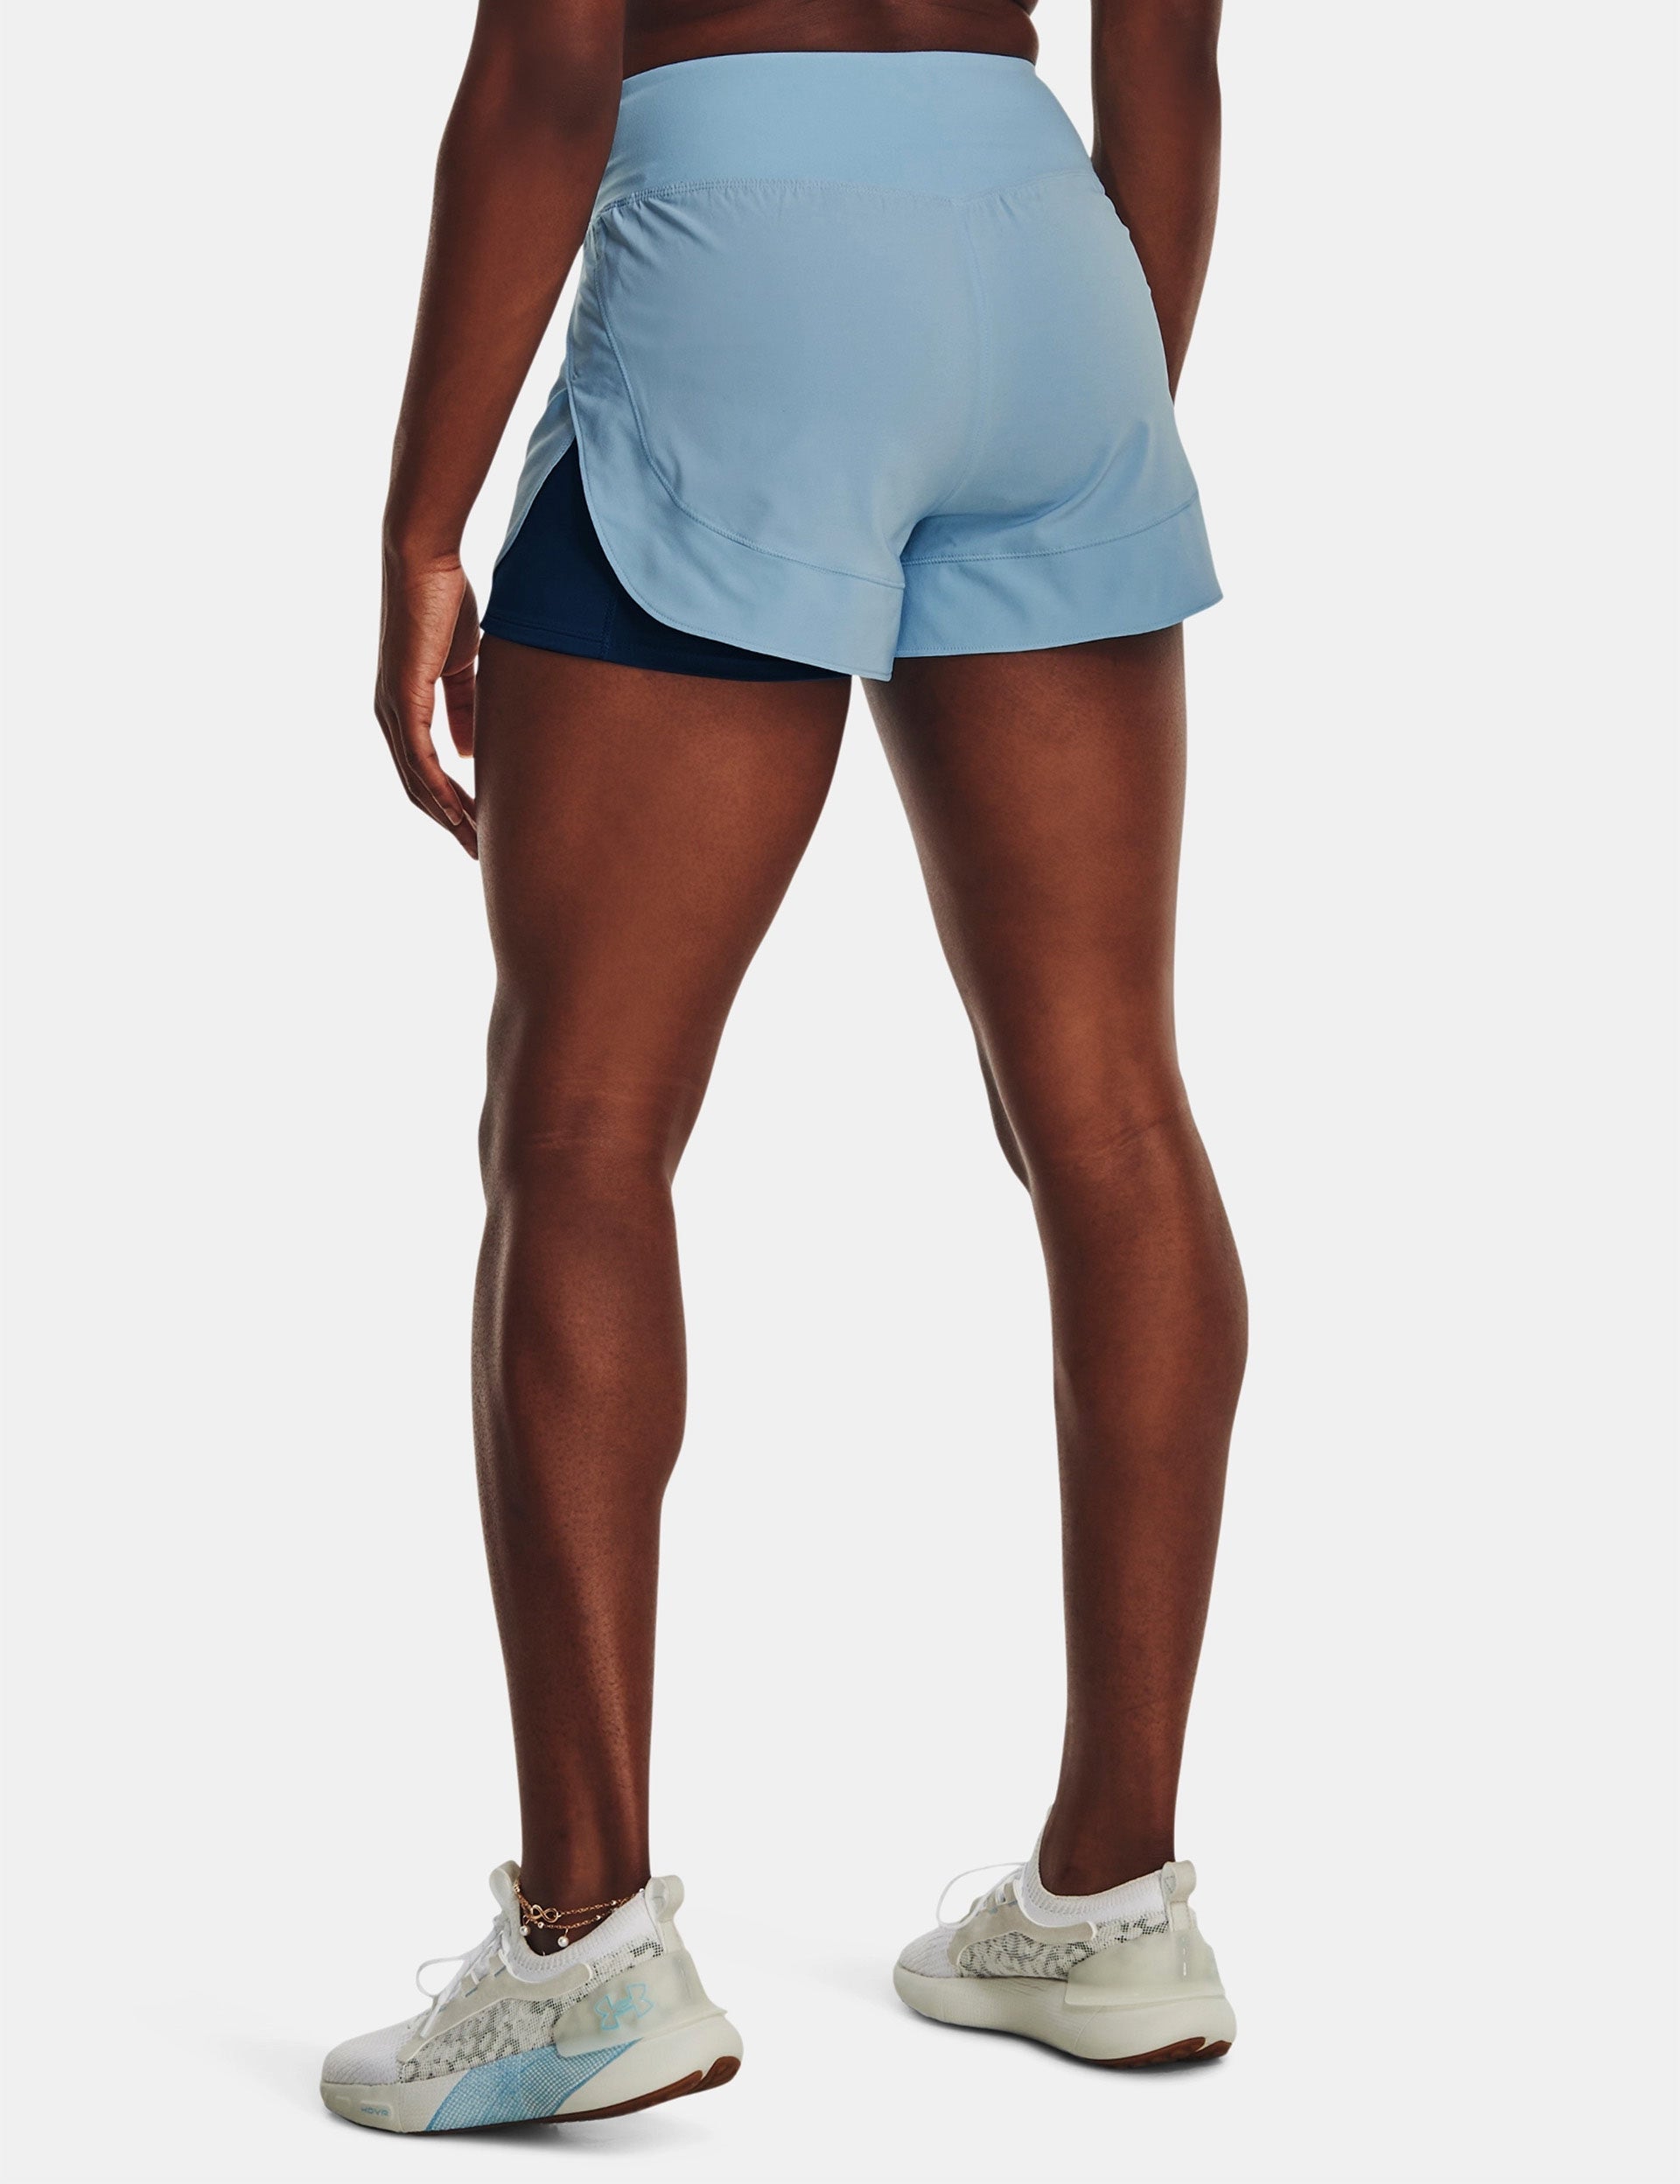 Under Armour Women's Shorts on Sale! Shop here!